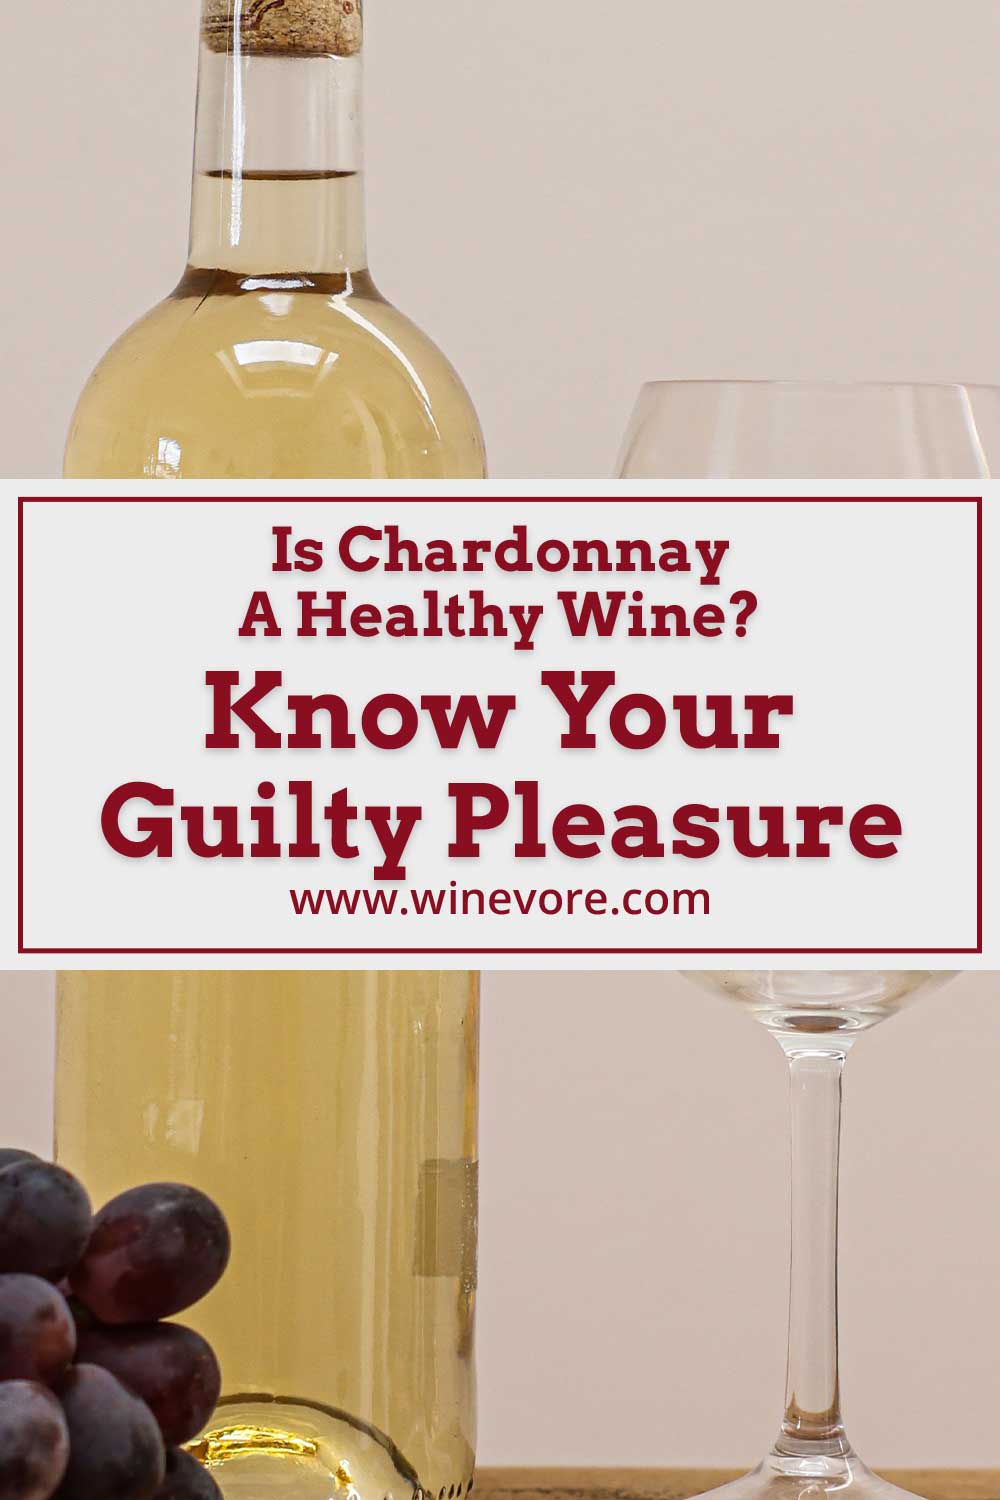 A bottle of Chardonnay with a wine glass - Is it a healthy wine?